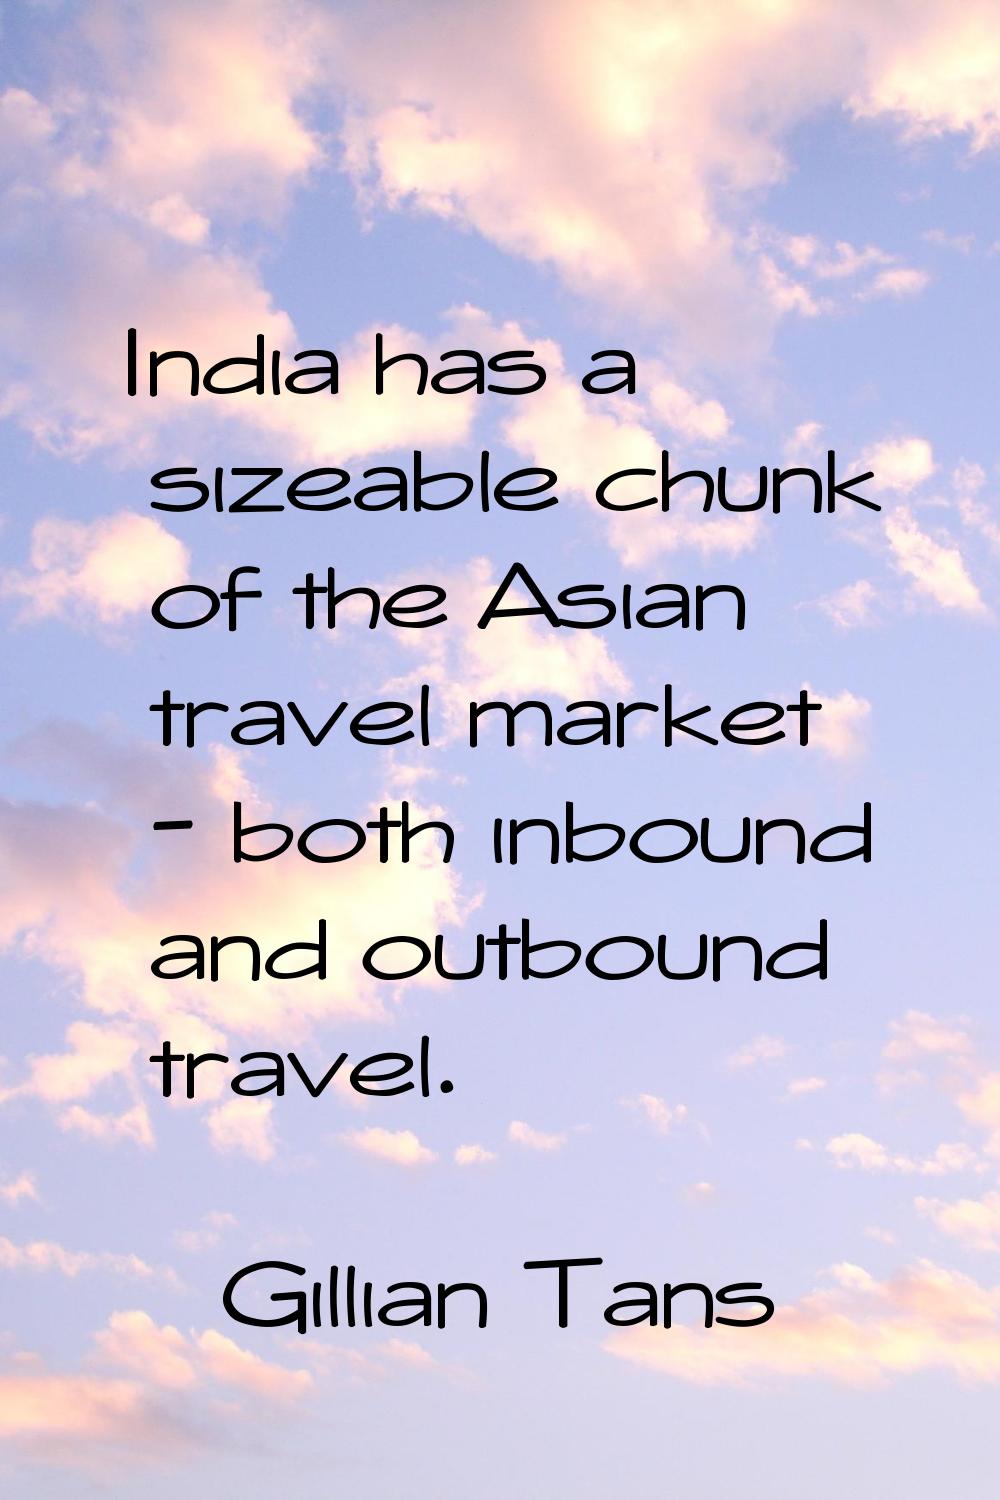 India has a sizeable chunk of the Asian travel market - both inbound and outbound travel.